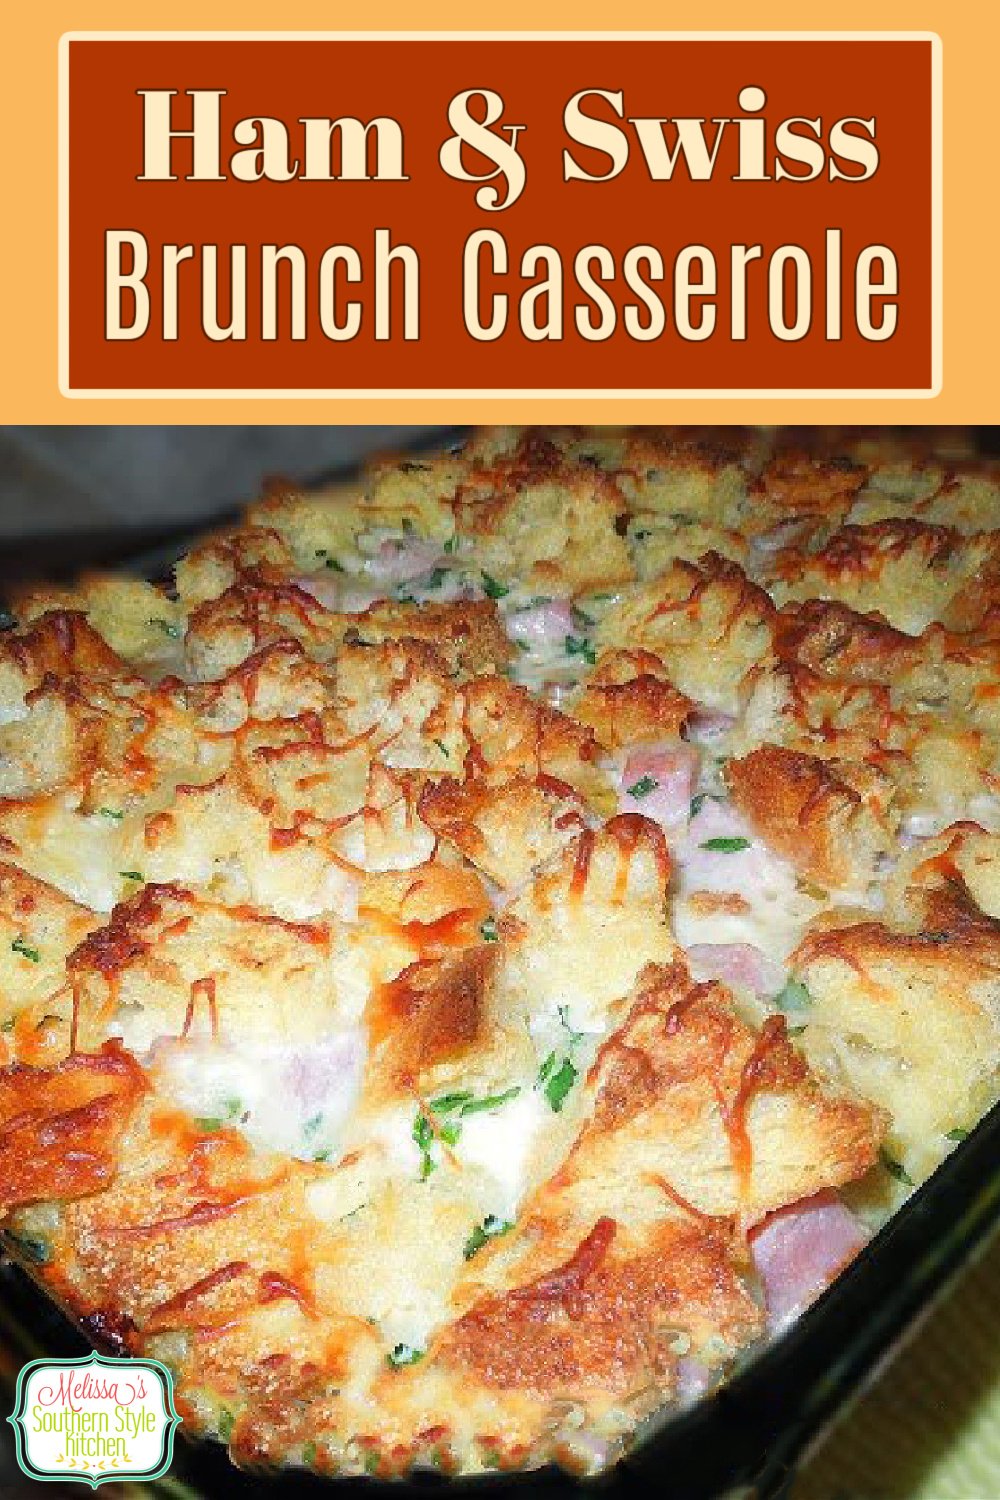 This overnight Ham and Swiss Brunch Casserole is amazing drizzled with pure maple syrup. #hamandswiss #brunchbake #brunchrecipes #leftoverhamrecipes #ham #overnightcasseroles #breakfastcasseroles via @melissasssk